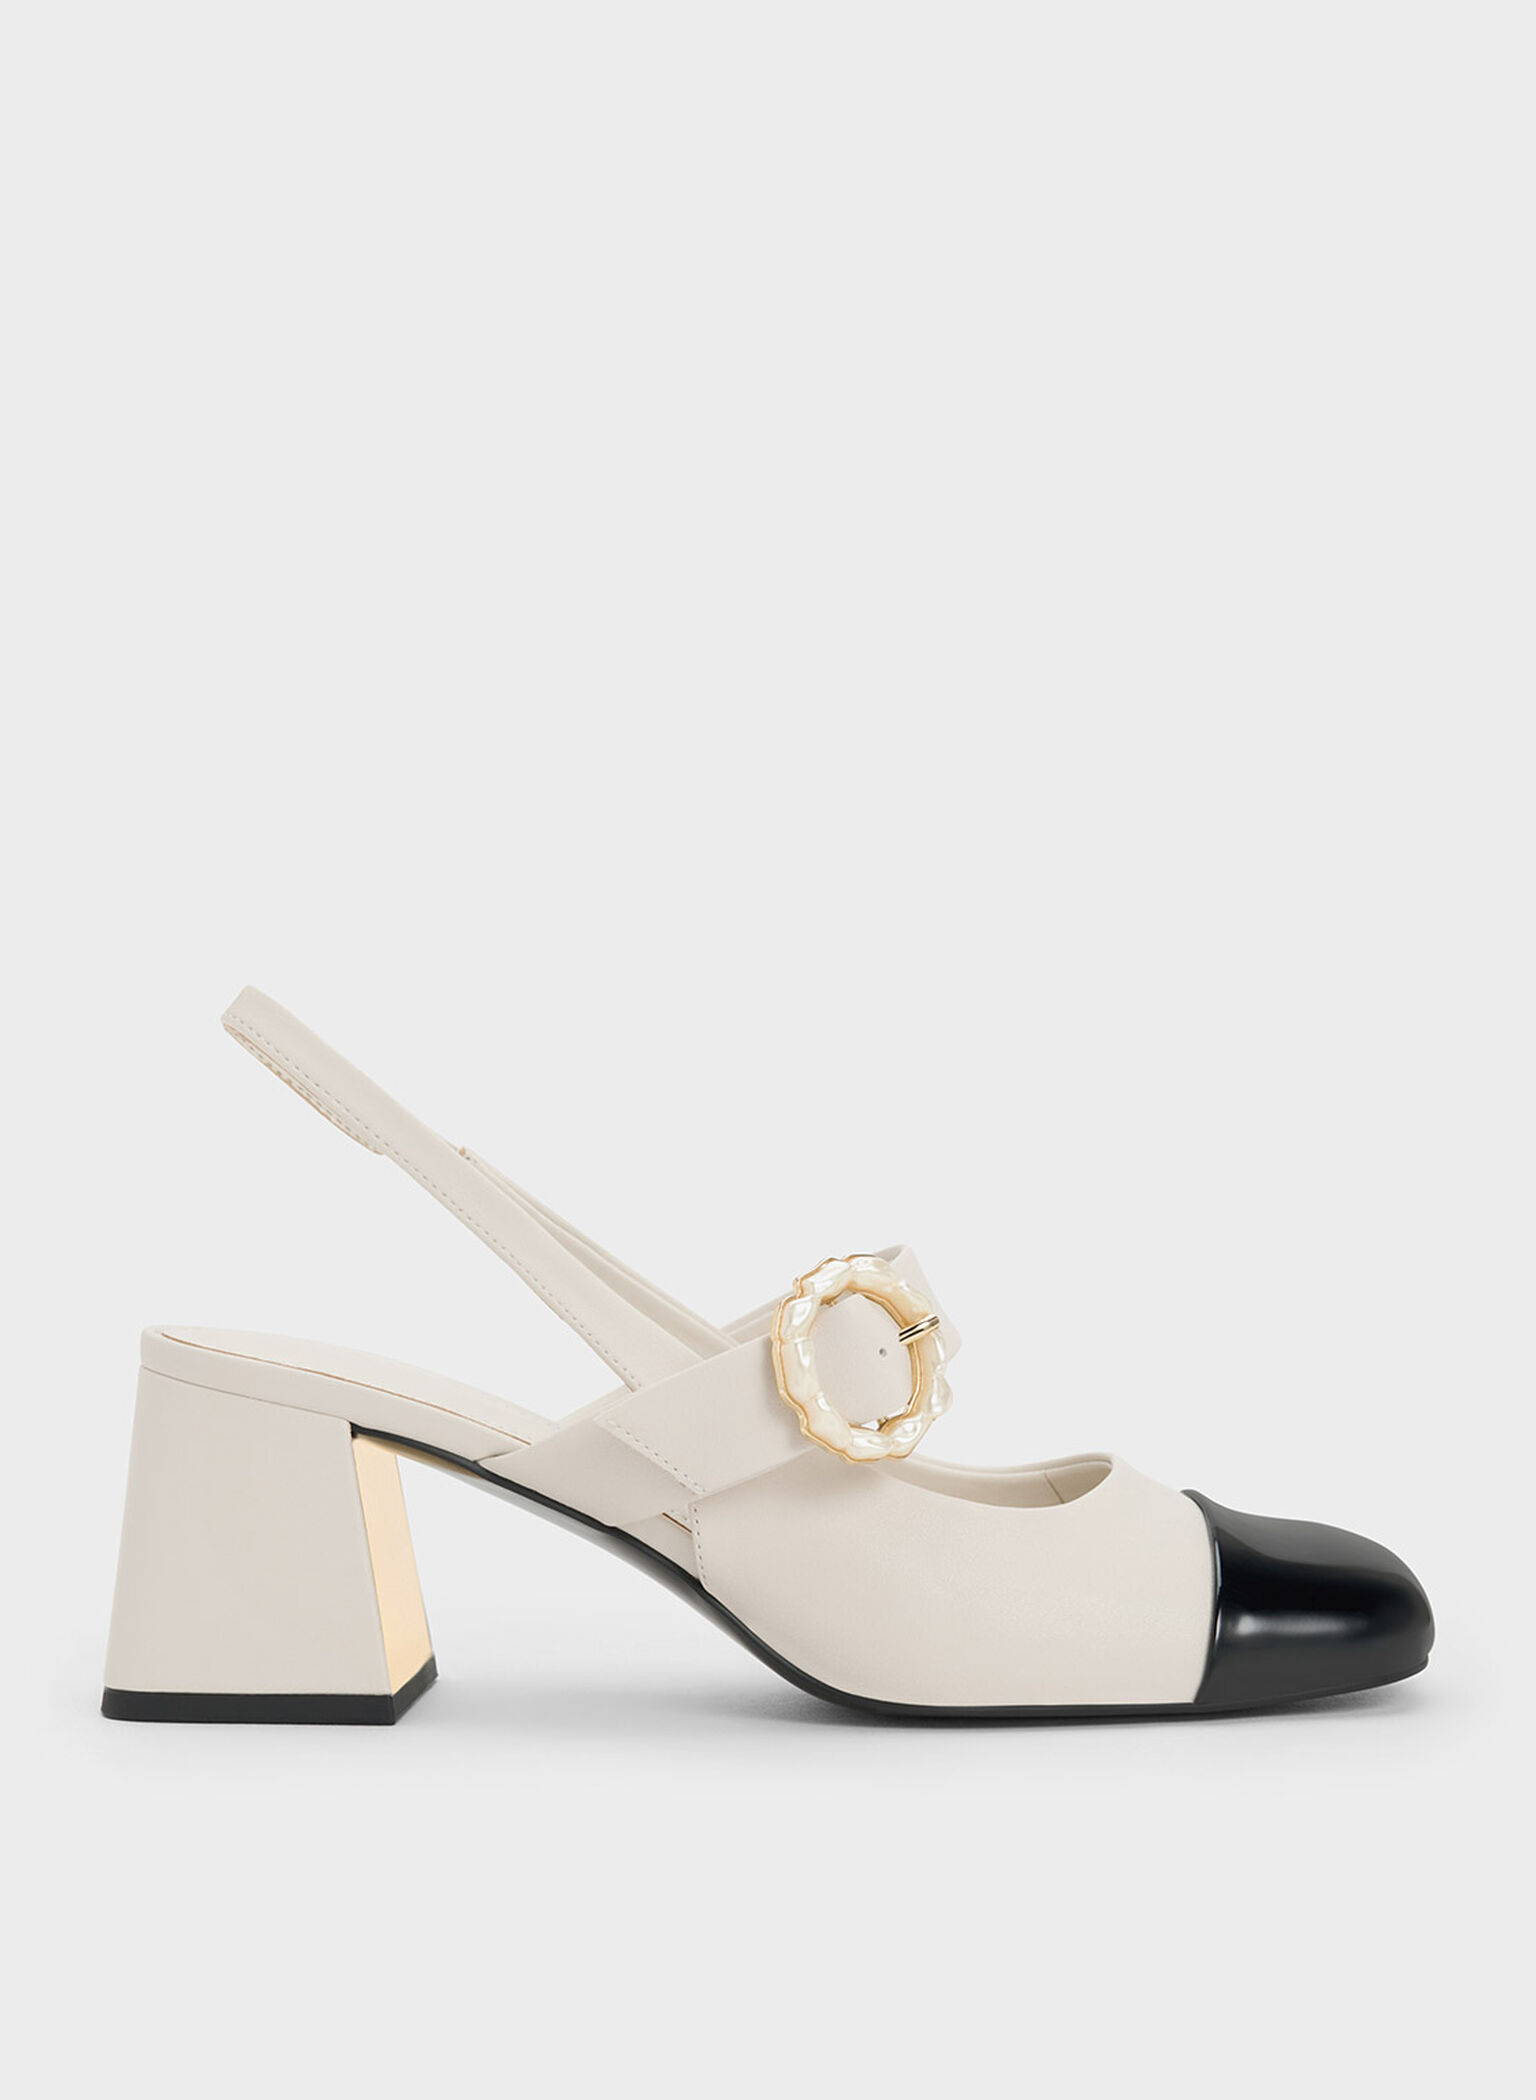 CHANEL, Shoes, Chanel Logo Sandals Gray Patent Block Heel Cc In Chrome  Metal Camellia 39